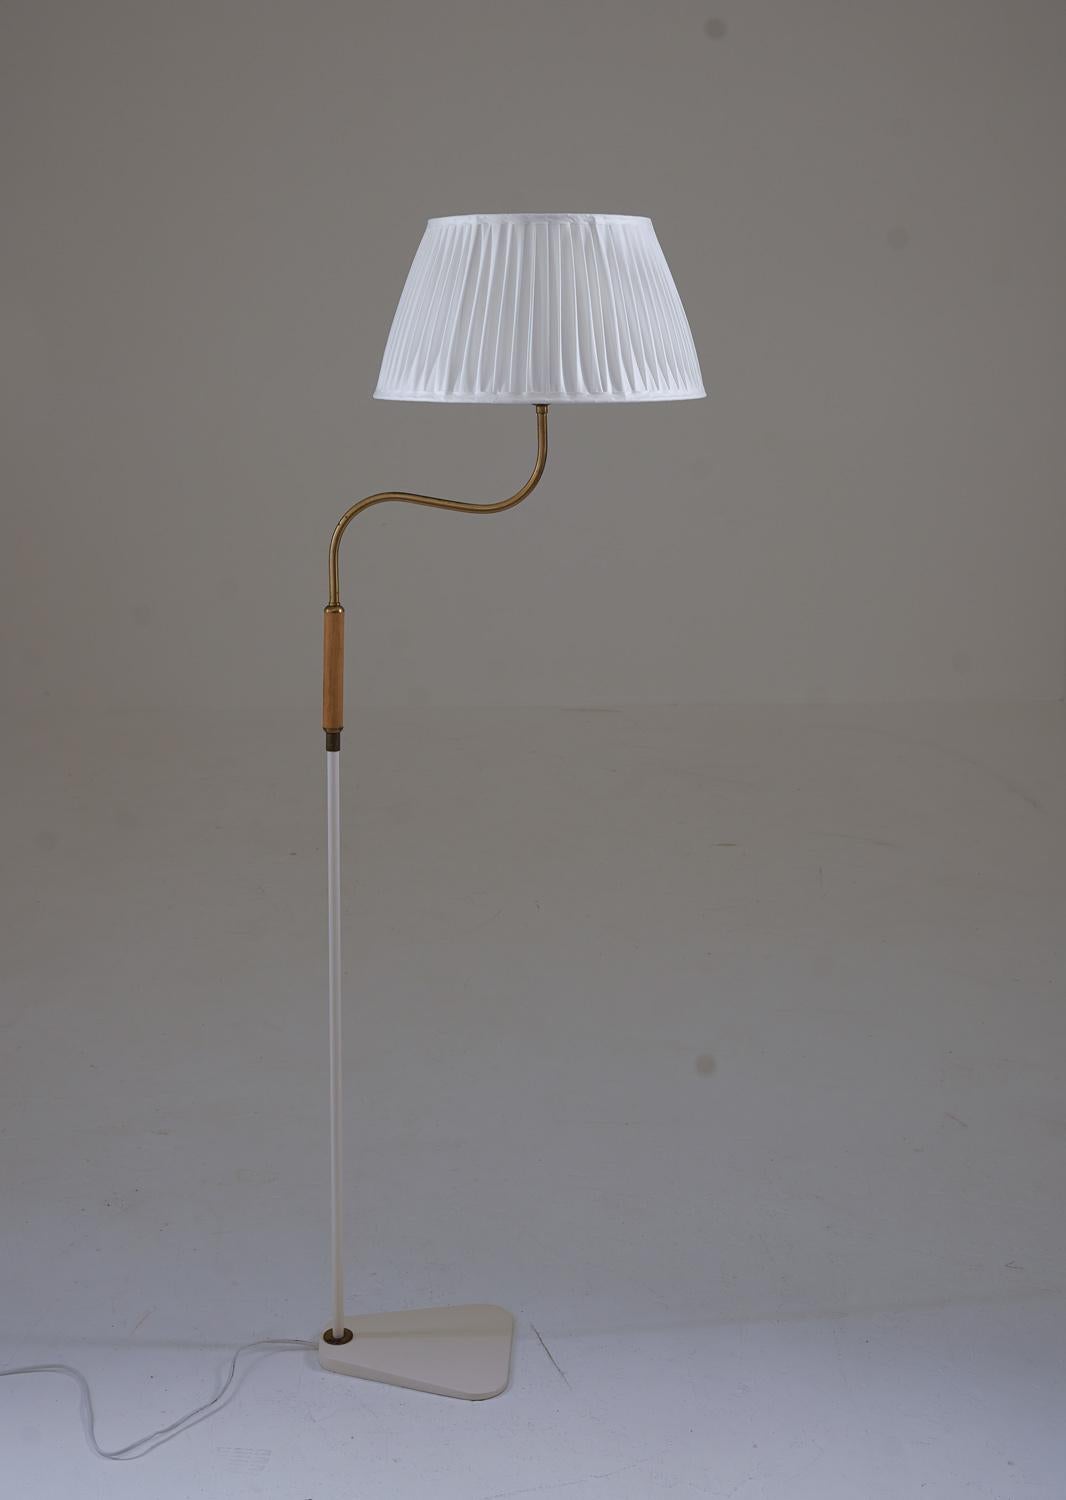 Swedish modern floor lamp attributed to ASEA.
The lamp is made of lacquered metal, with details brass and teak details.

Condition: The lamp has been re-lacquered and comes with a new hand-pleated shade.